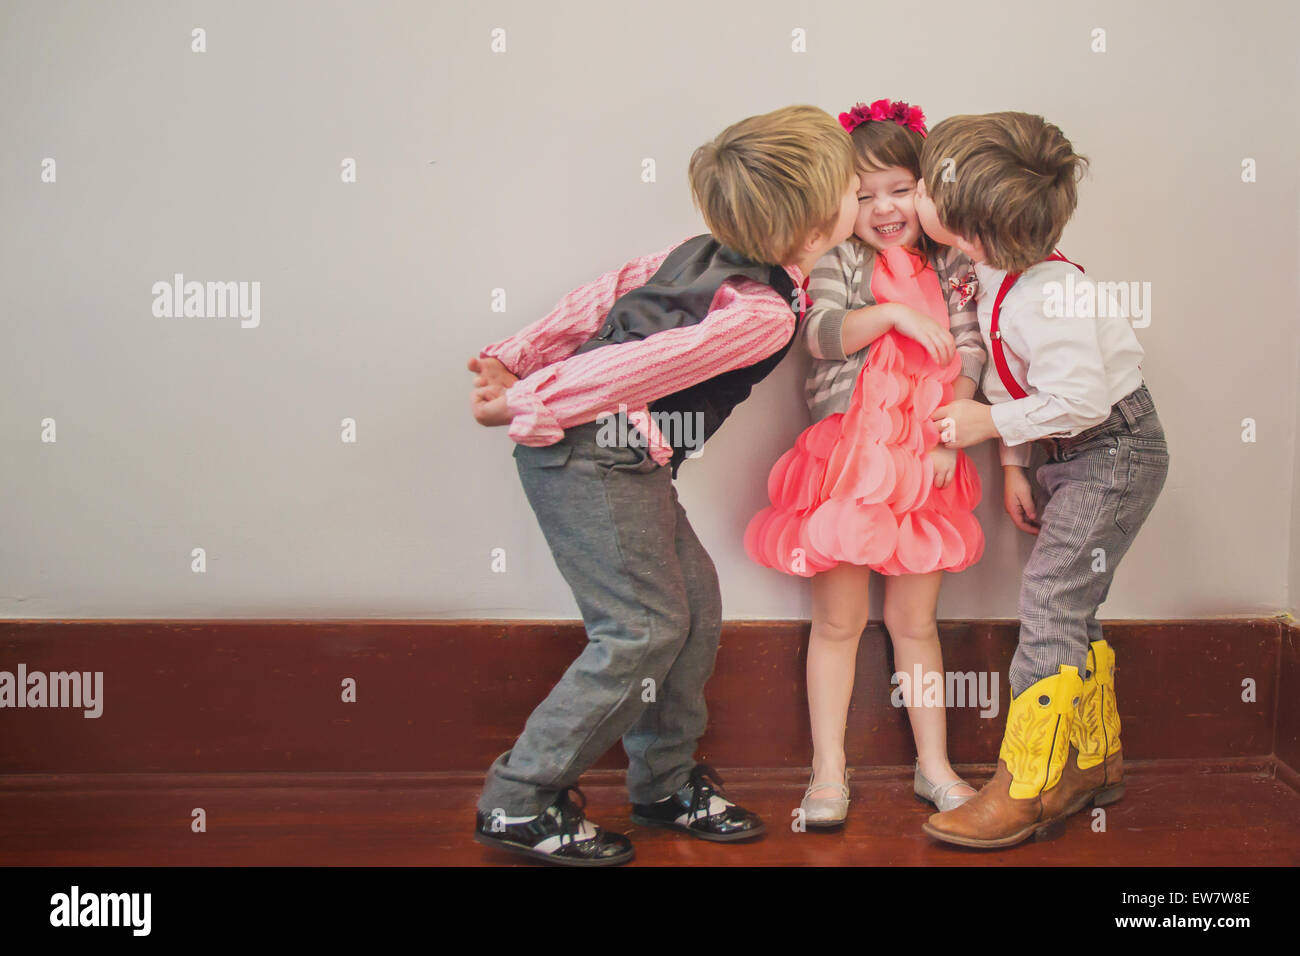 Two boys kissing a girl on the cheek Stock Photo